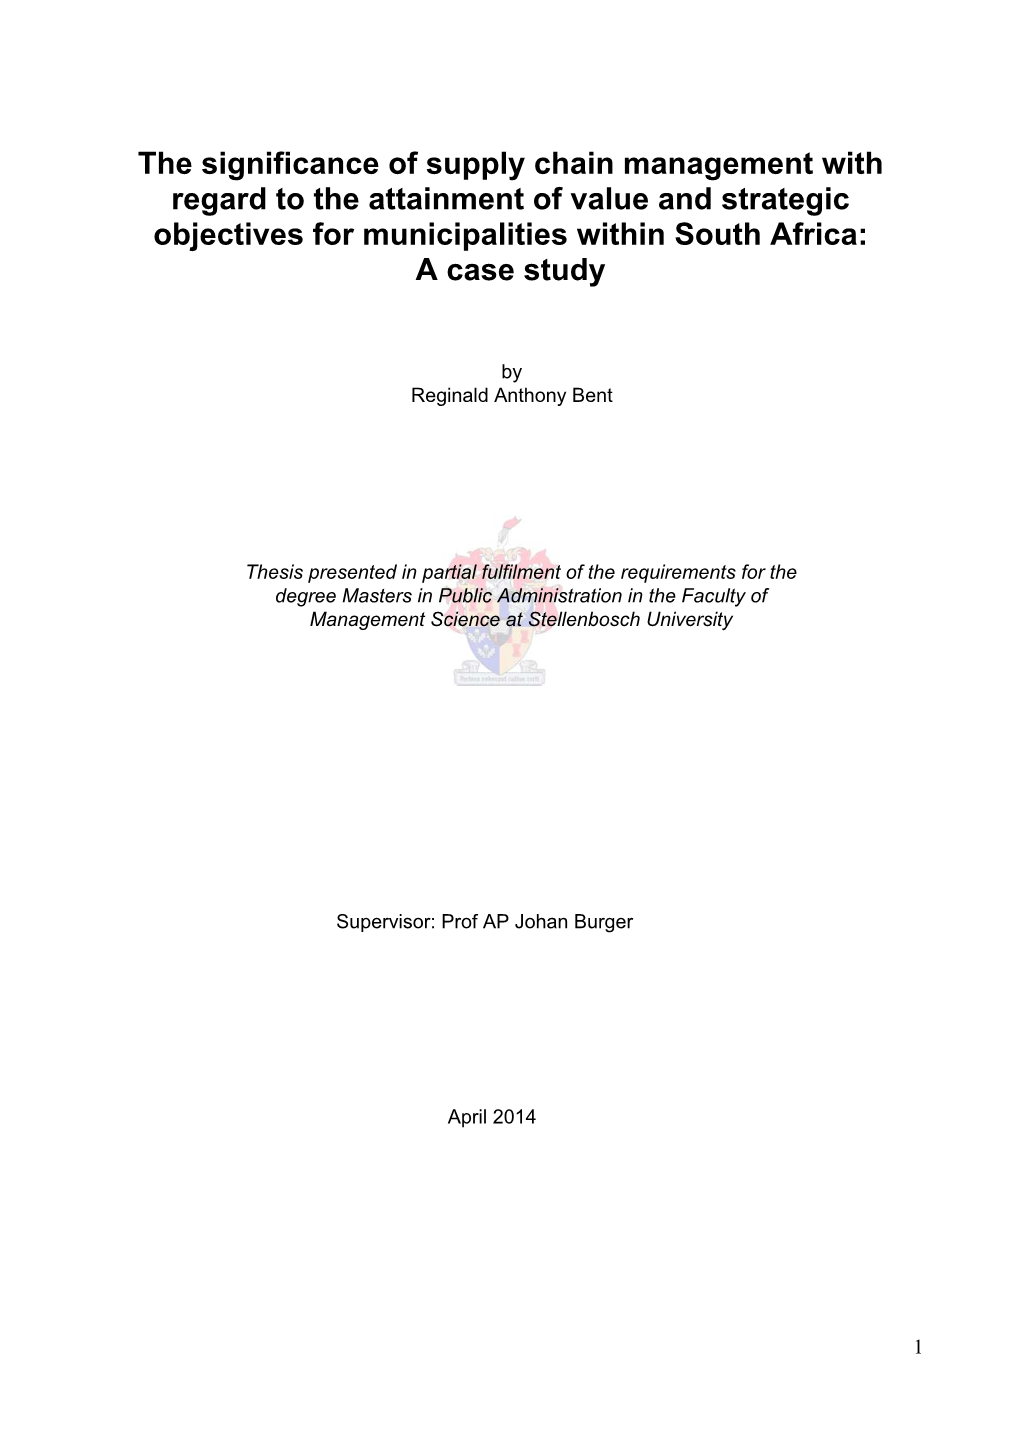 The Significance of Supply Chain Management with Regard to the Attainment of Value and Strategic Objectives for Municipalities Within South Africa: a Case Study